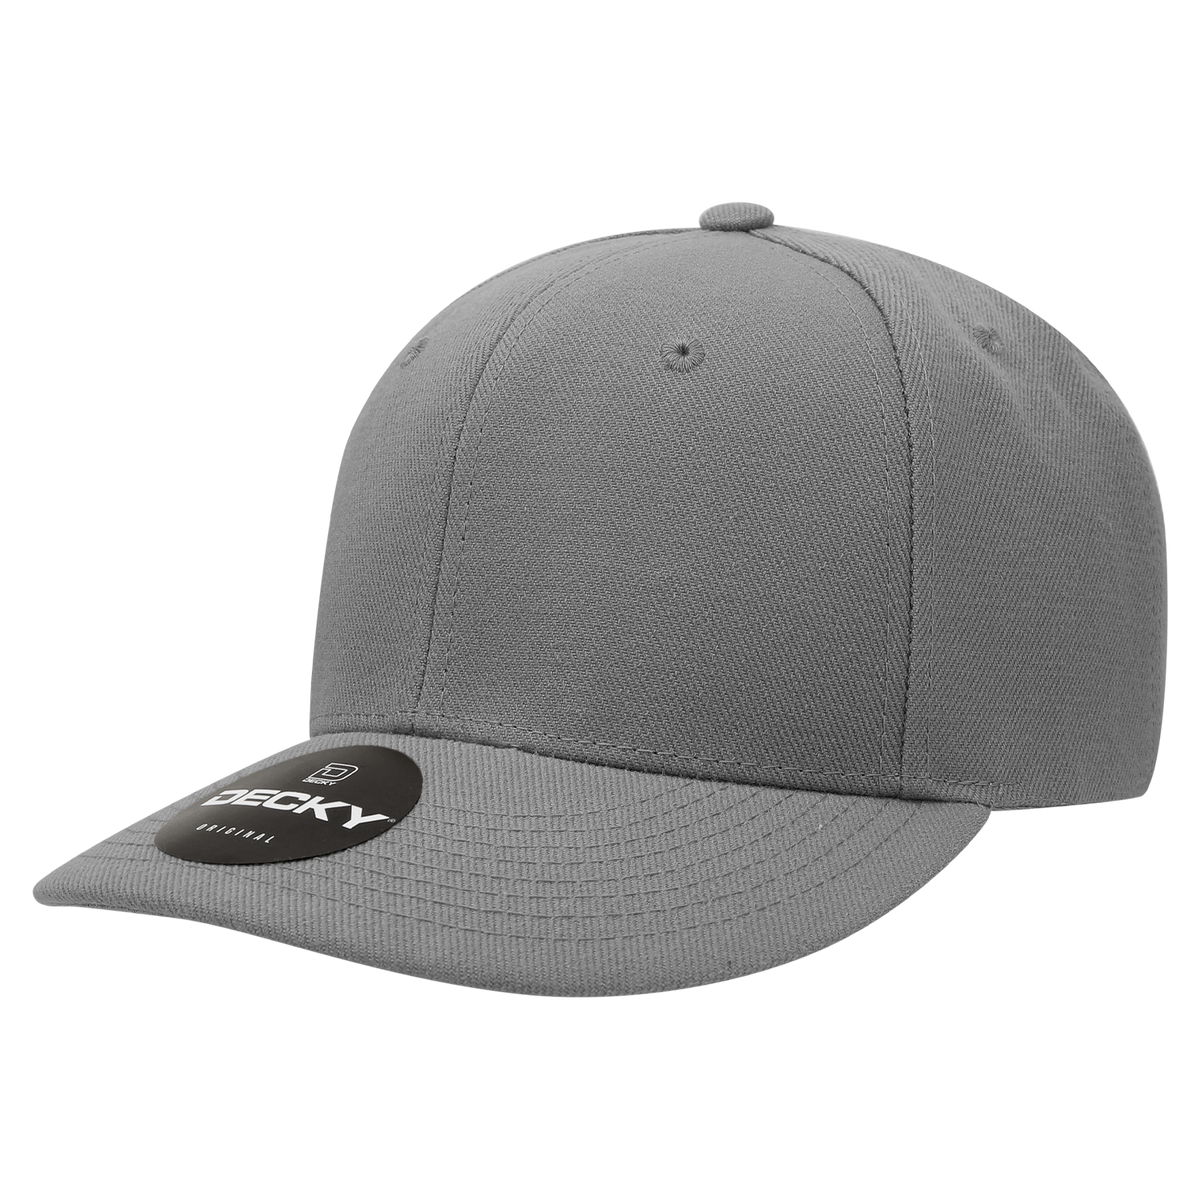 Decky 207 - Deluxe, Mid Pro Baseball Hat, 6 Panel Structured Cap - CASE  Pricing